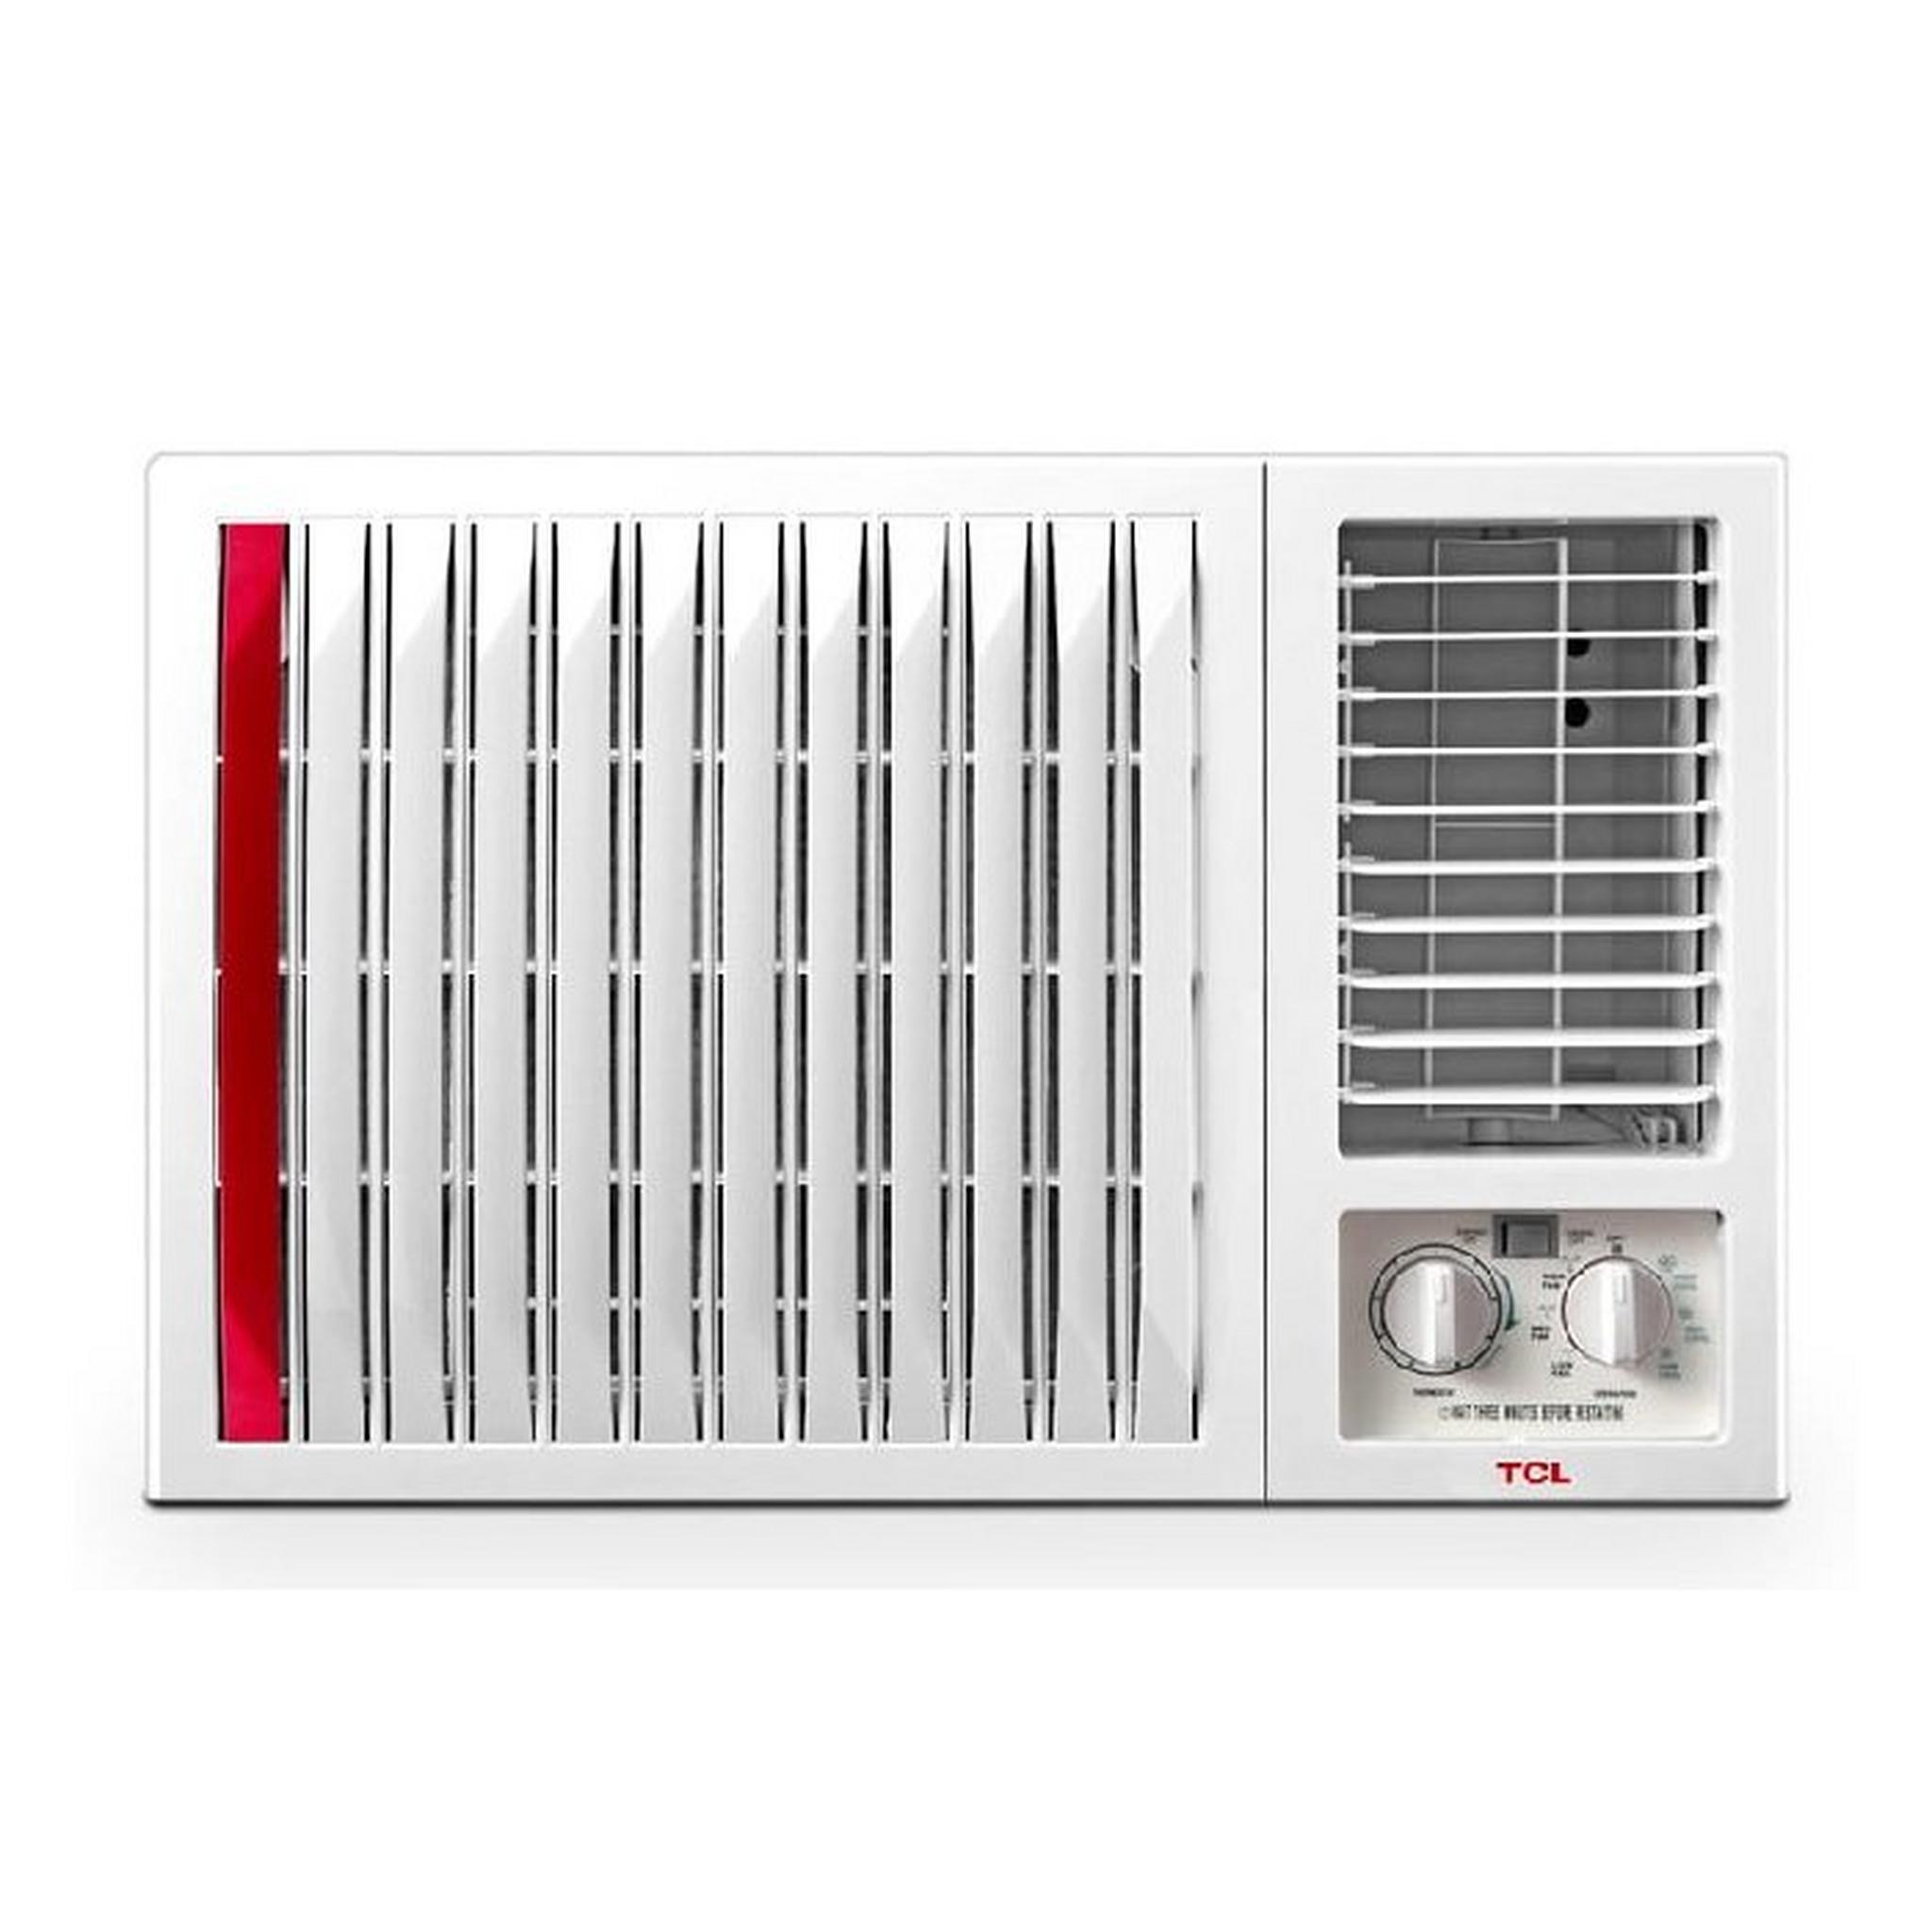 TCL window Air Conditioner, 17,297 BTU, Cooling, TAC-24CWA/LT - White